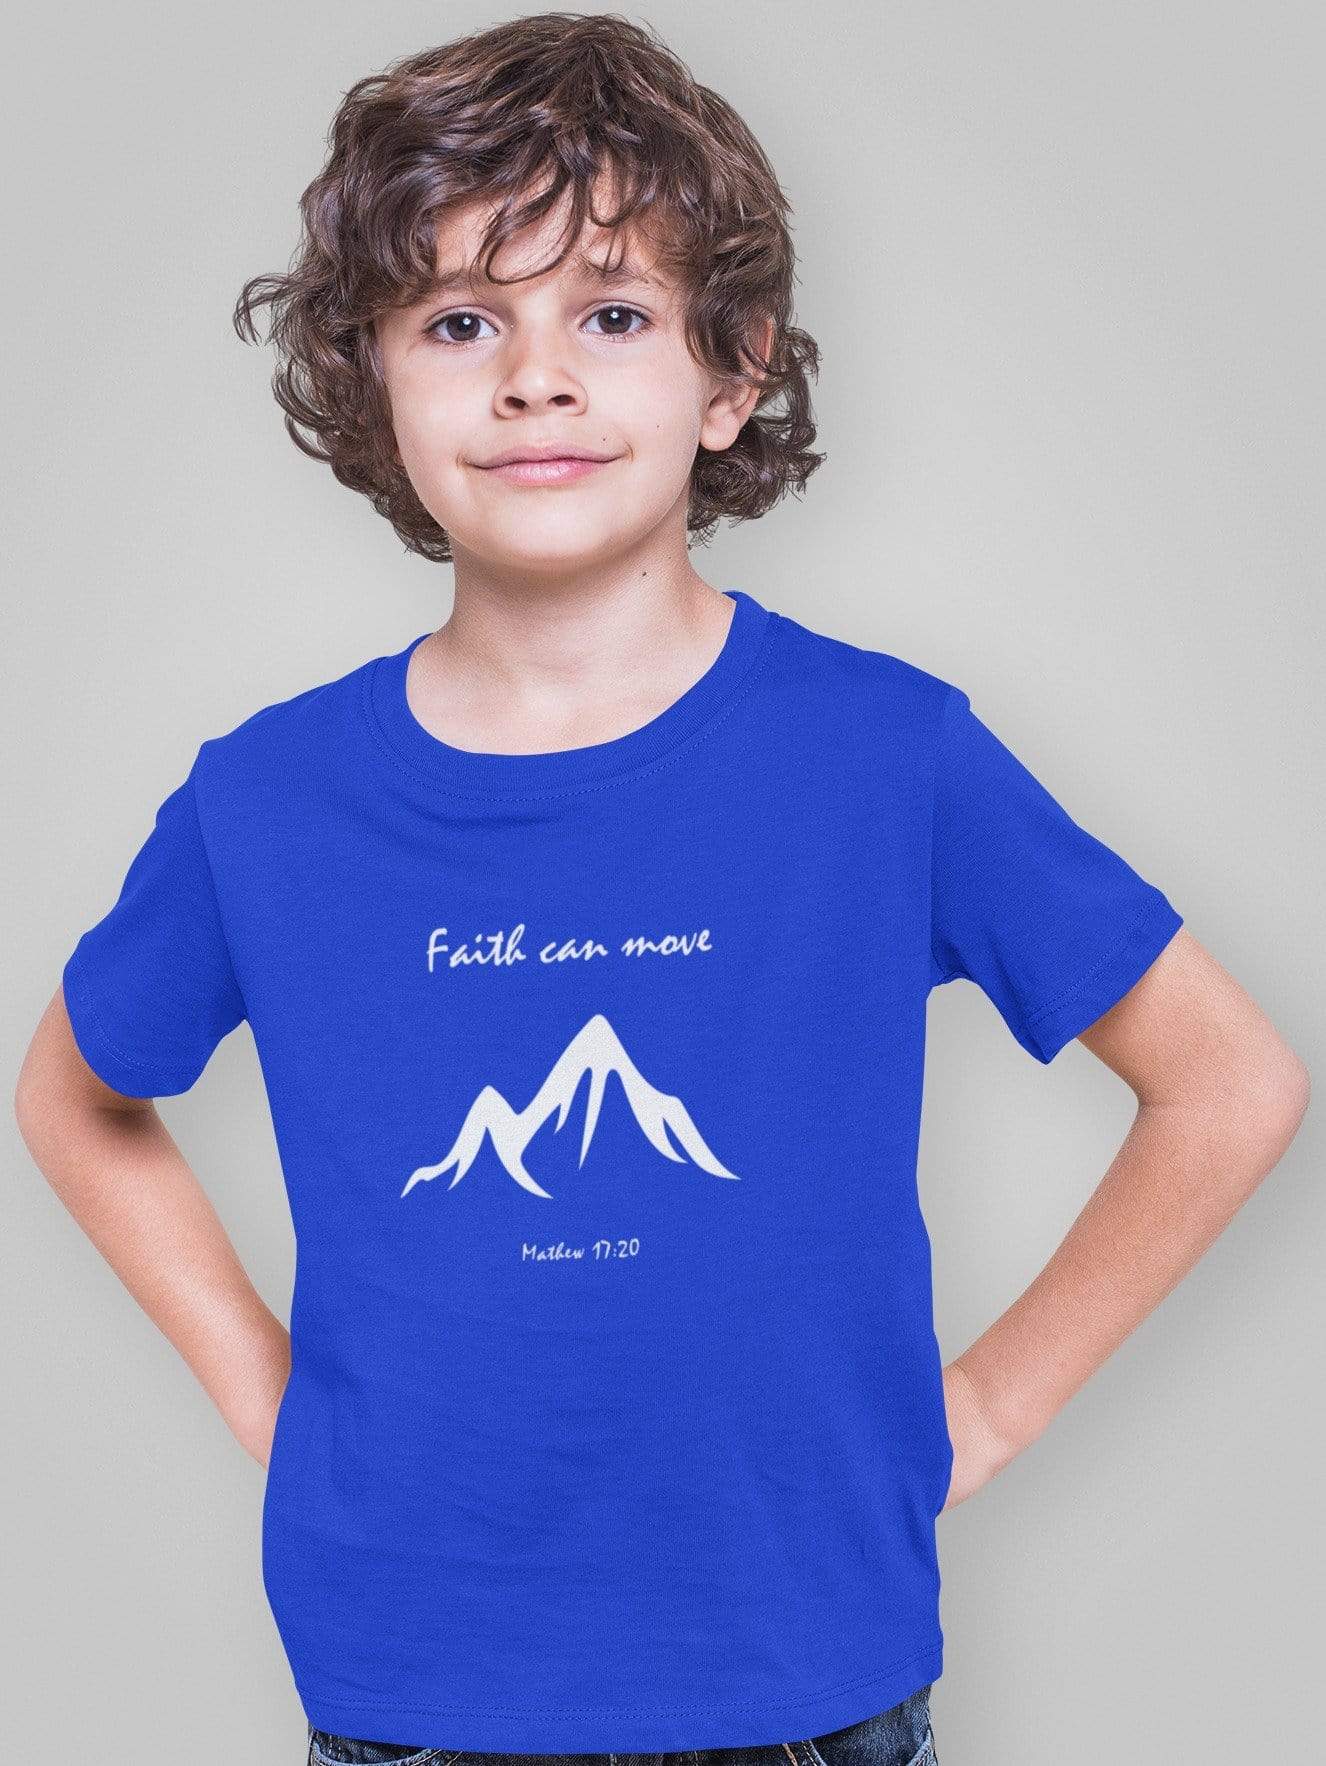 Living Words Kids Round Neck T Shirt Boy / 0-12 Mn / Royal Blue Faith can move